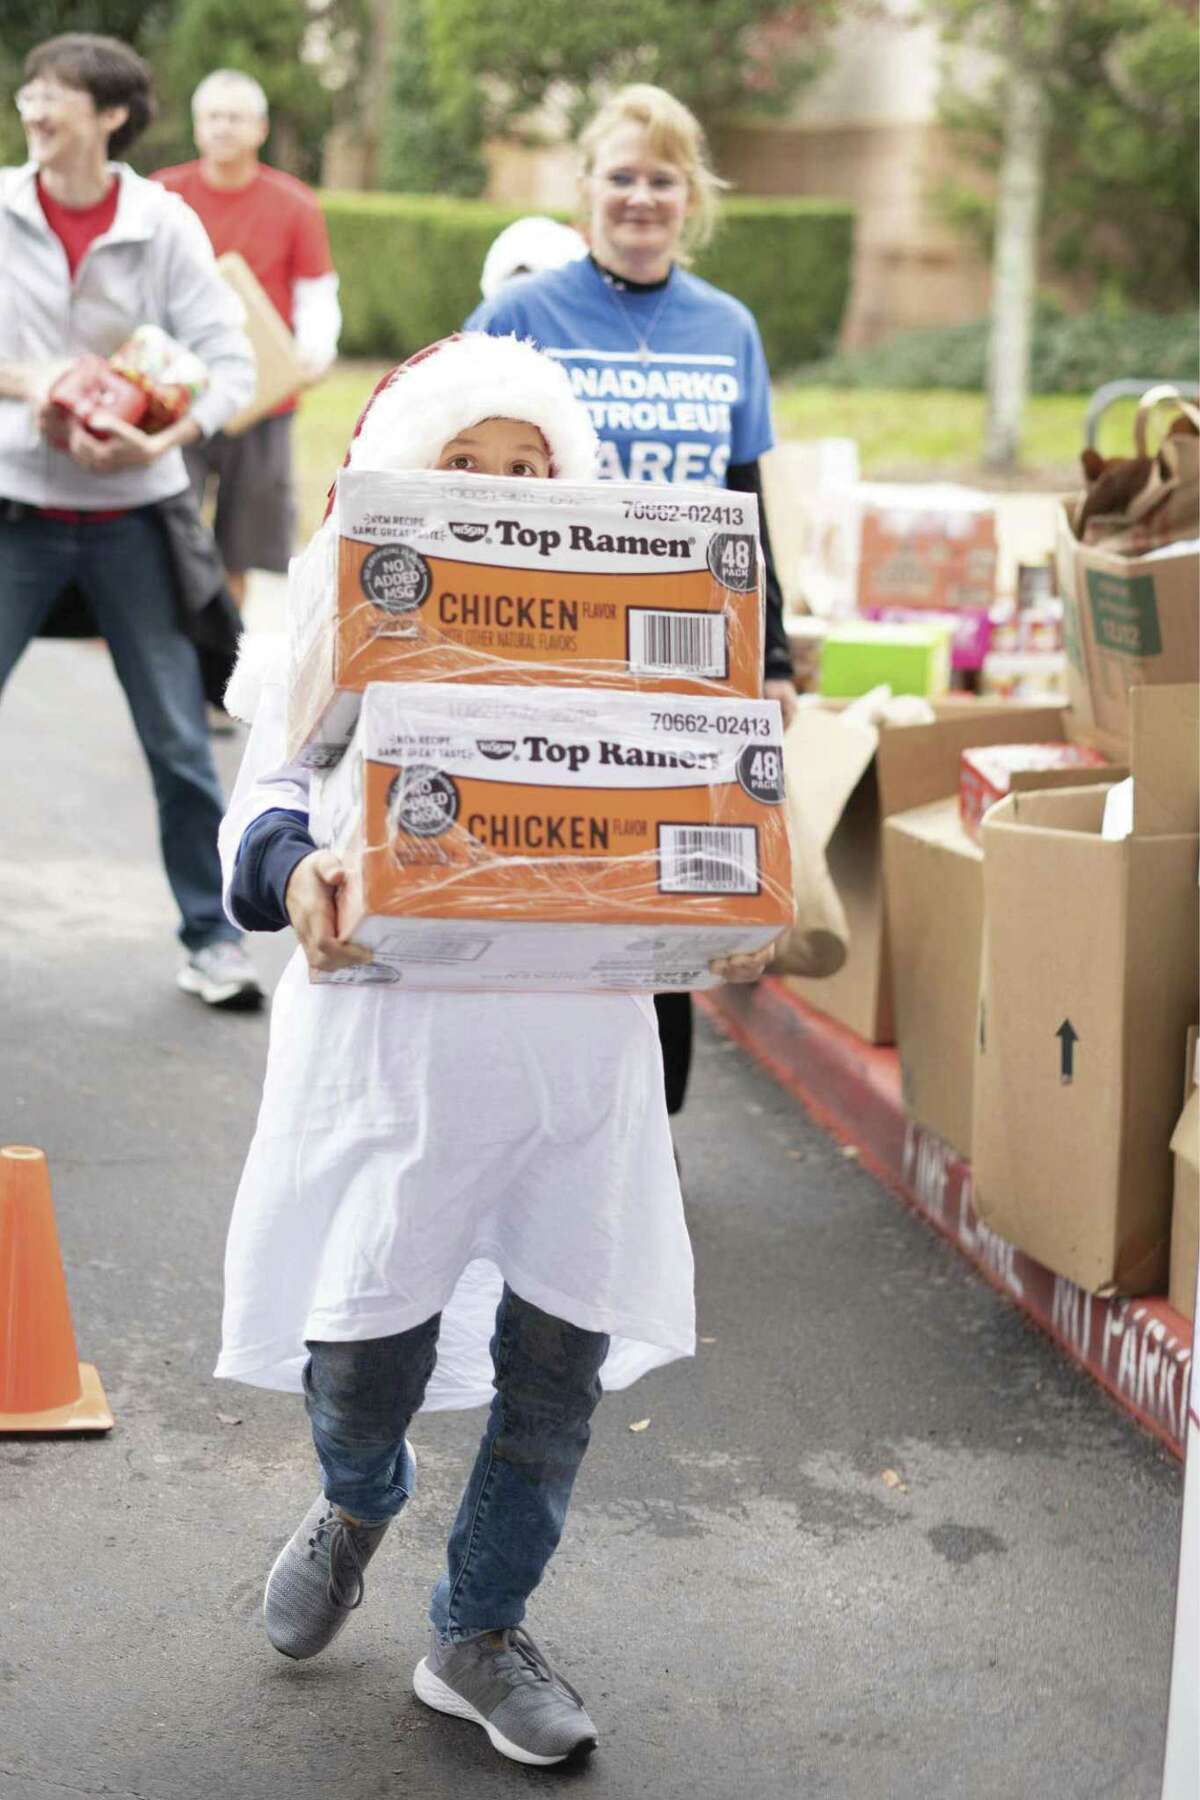 A youngster helps carry food at the Montgomery County Food Bank Holiday Food Drive in December. The Food Bank collected 56,629 pounds of food during the Holiday Food Drive.